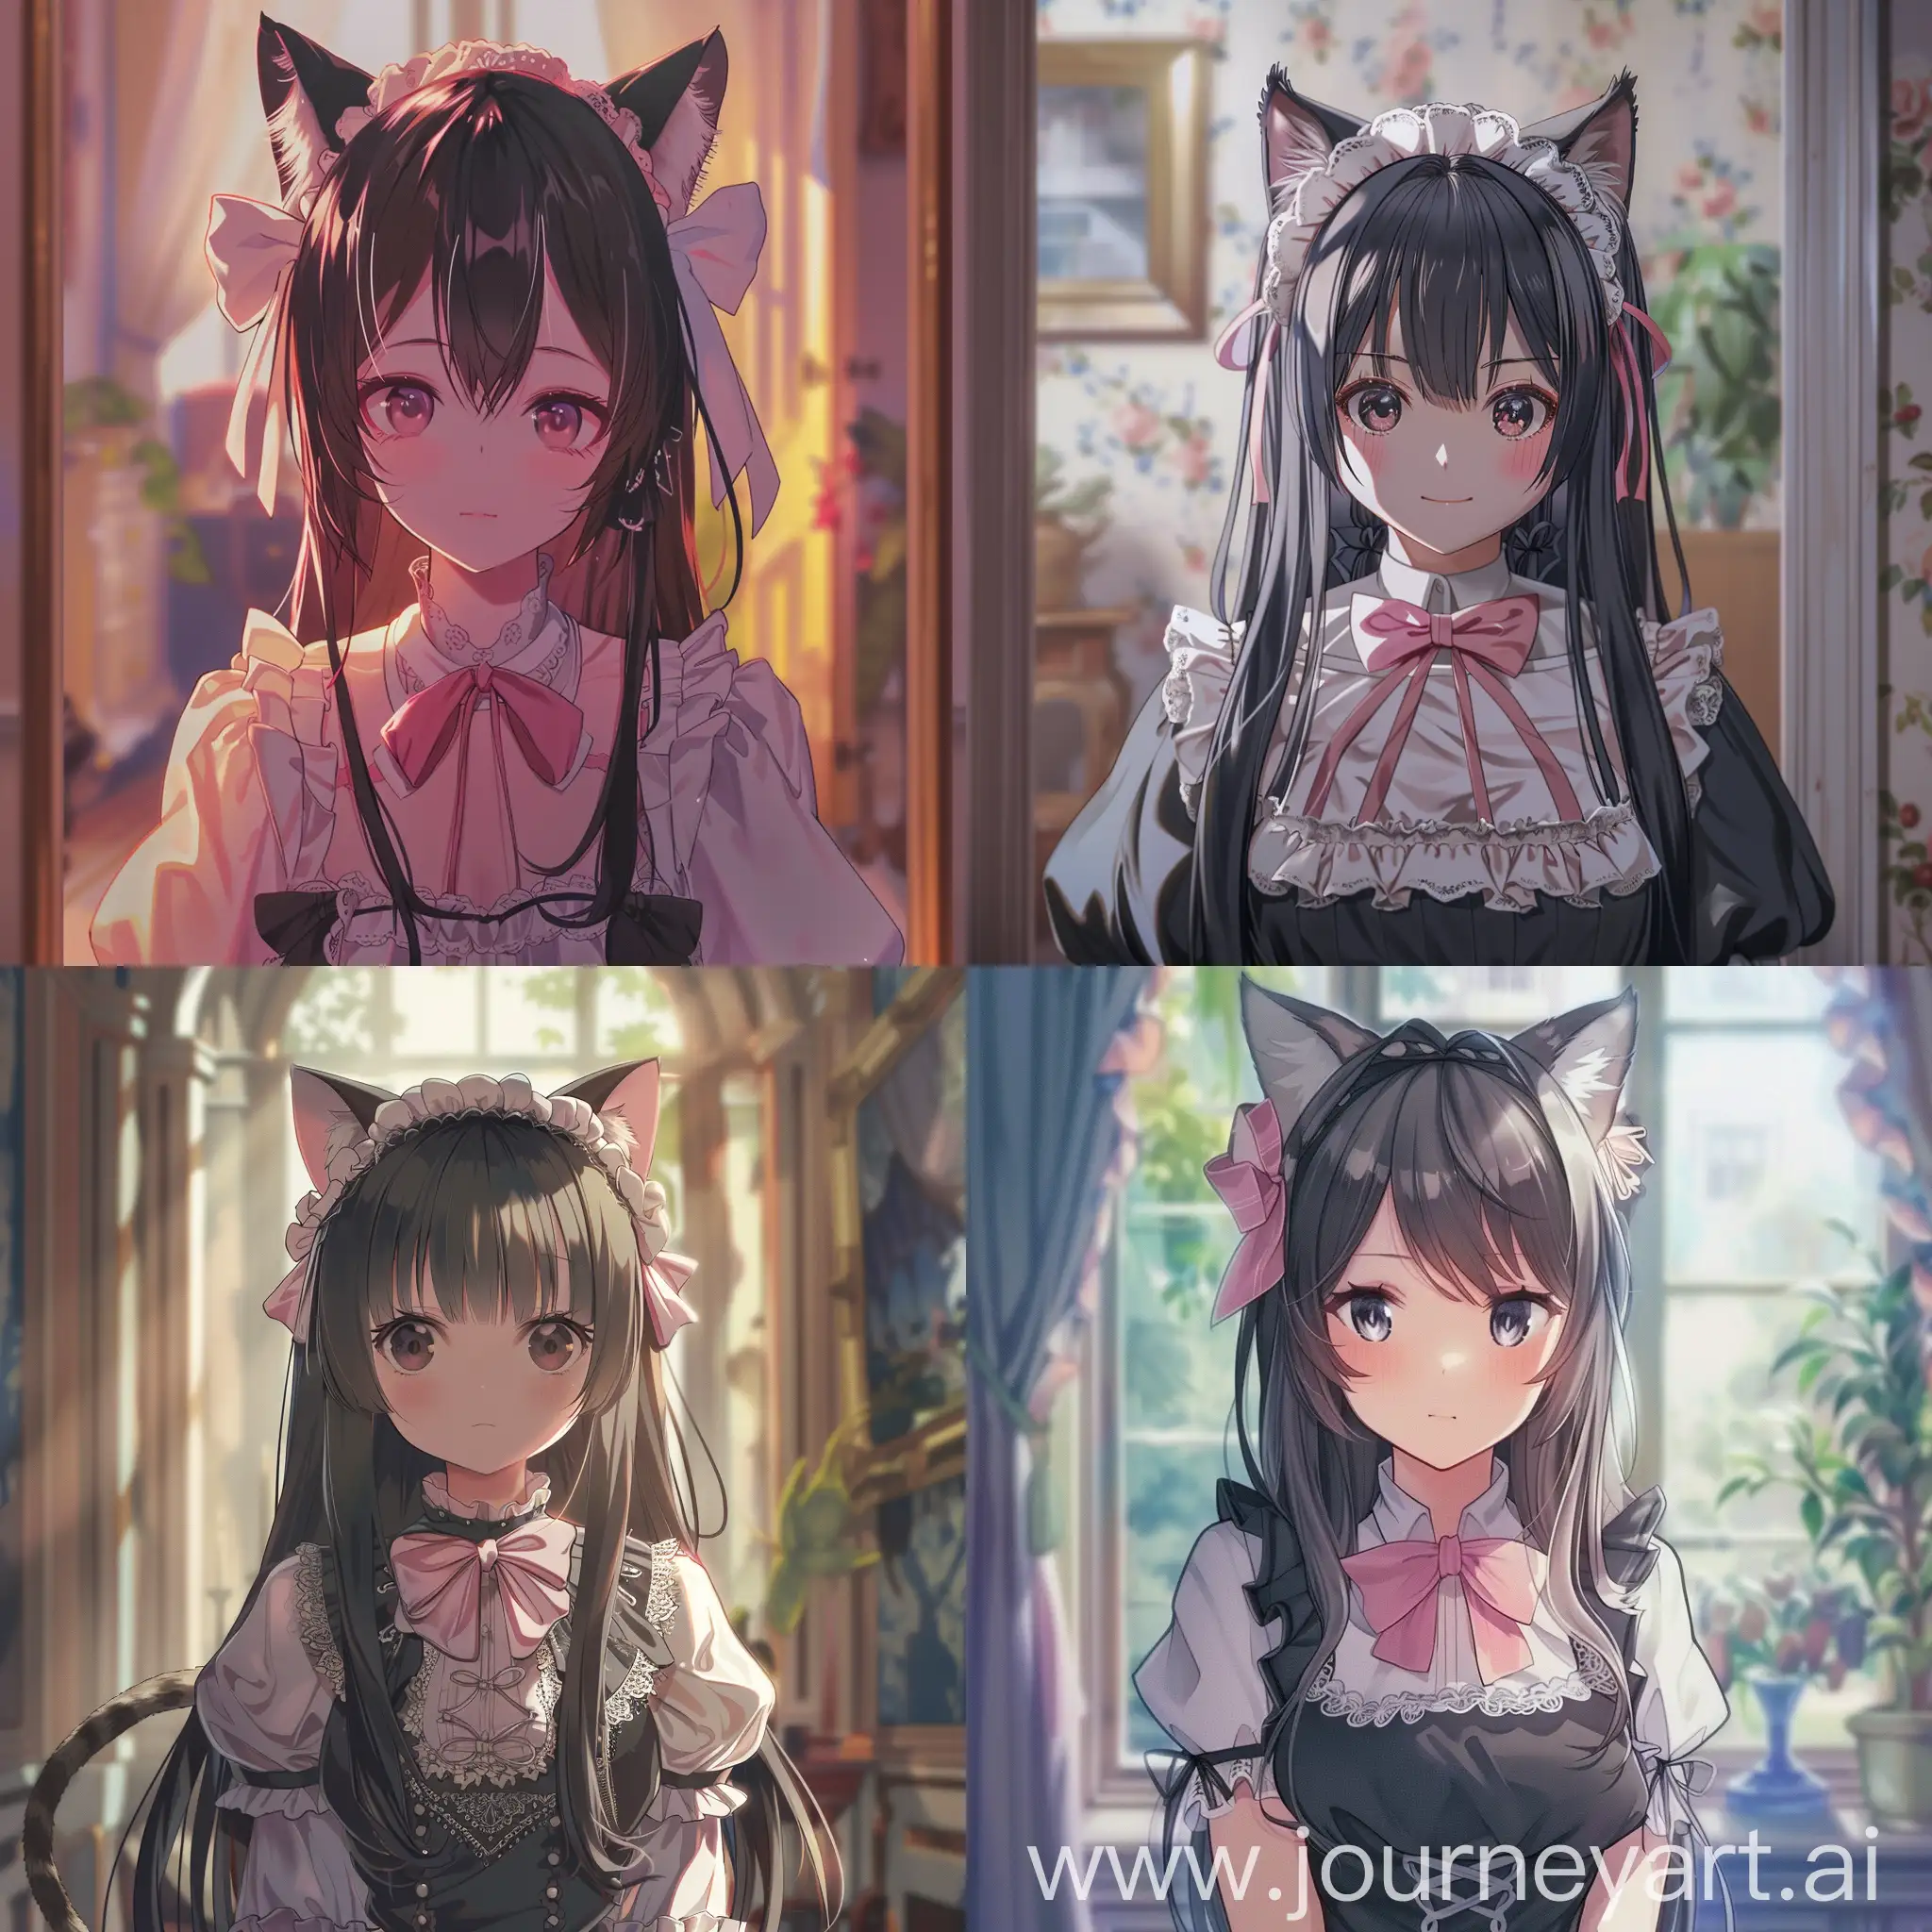 Cute Anime Visual Novel Background,((Light novel illustration )),colurfull shades/tone/hue,A cute anime girl with long dark grey hair and cat ears, wearing a lace-trimmed maid outfit with a pink bow. She has a warm, friendly expression , with a dreamy background behind her. Novel cover style,Anime Style, novel illustration, 4K resolution, highly detailed,makoto Shinkai art,